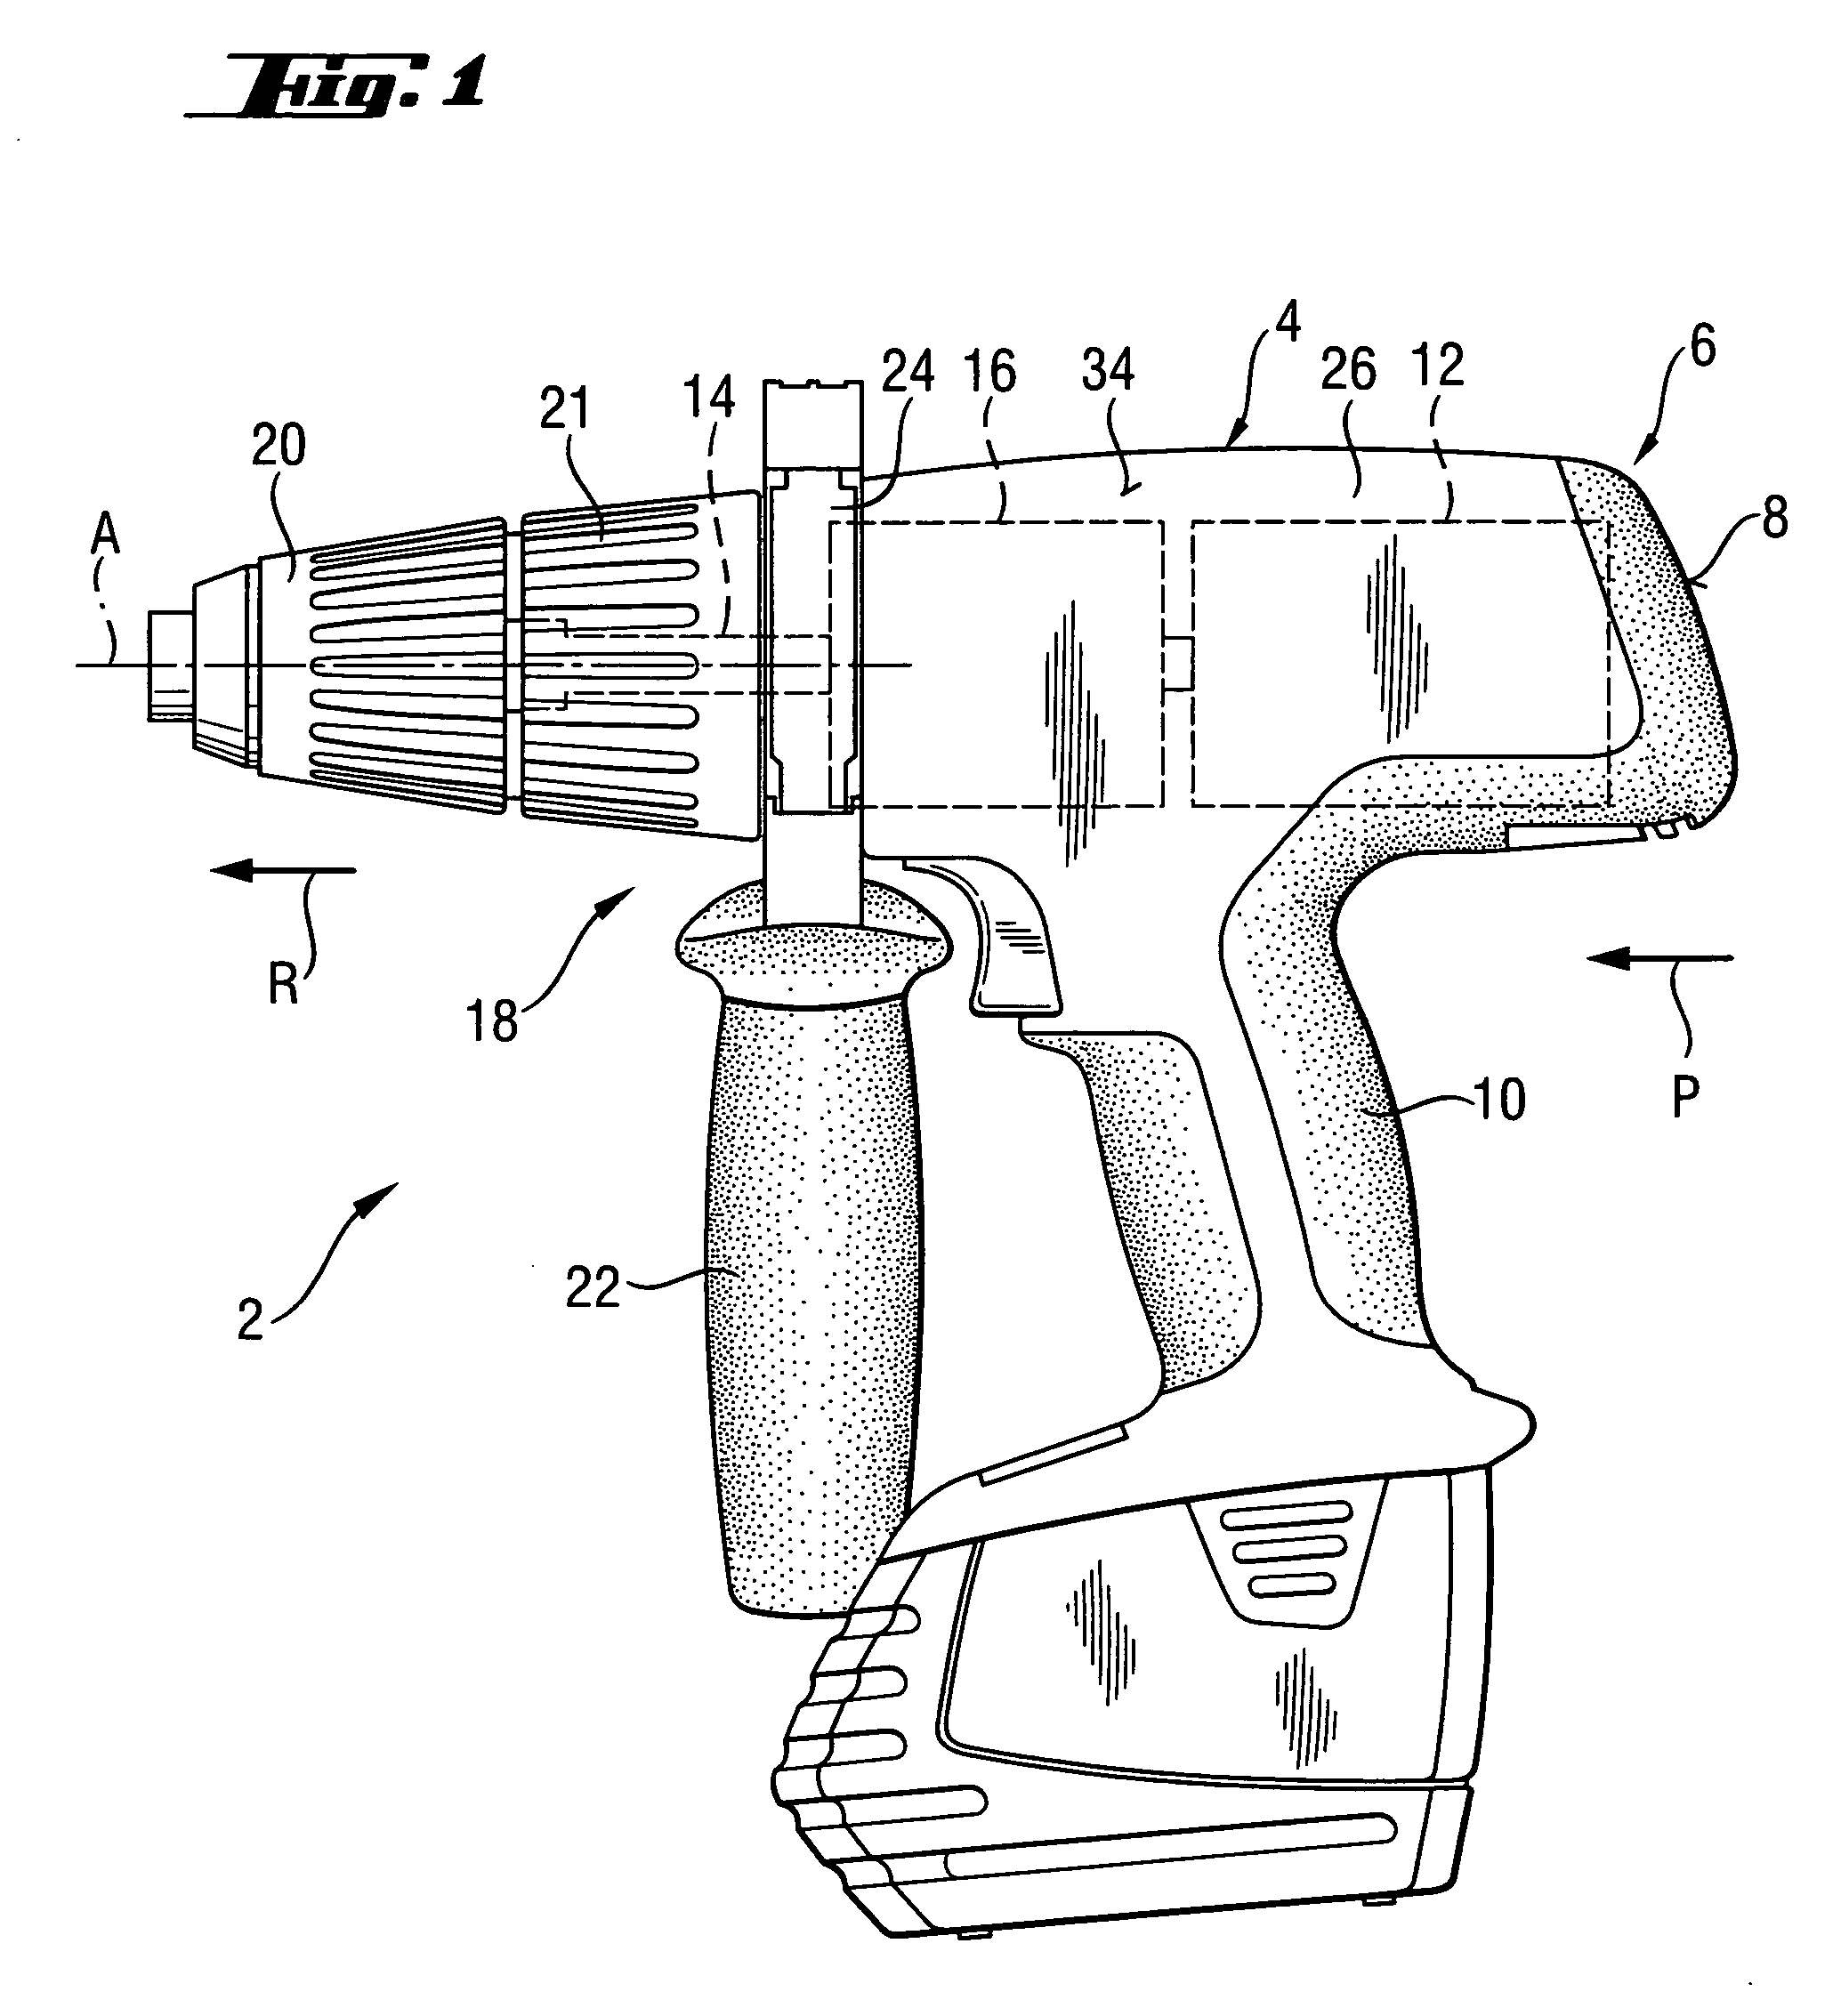 Hand-held power tool with ratchet percussion mechanism